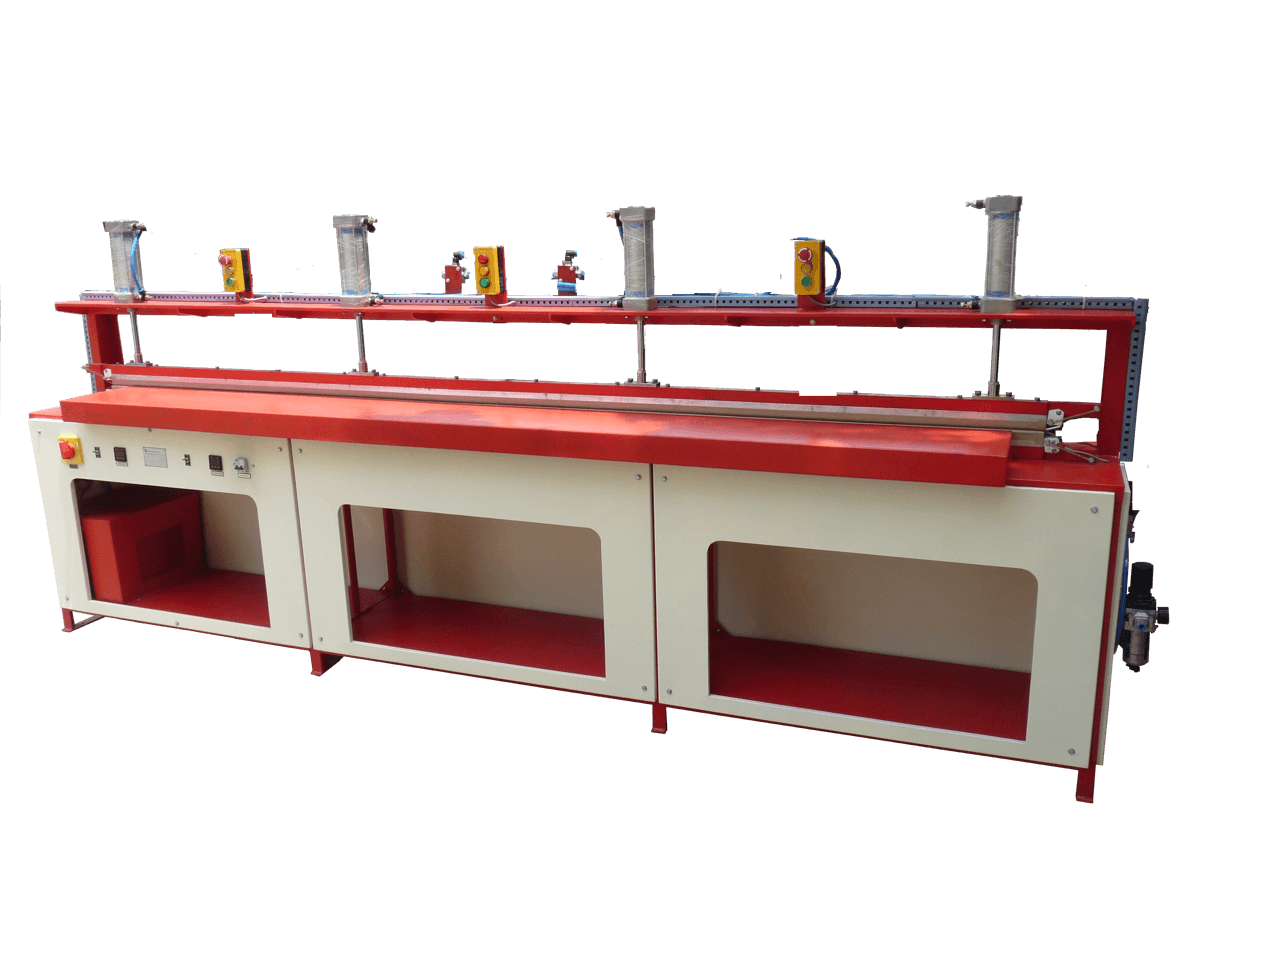 manufacturing & supplying fully automatic heavy duty sealing machines